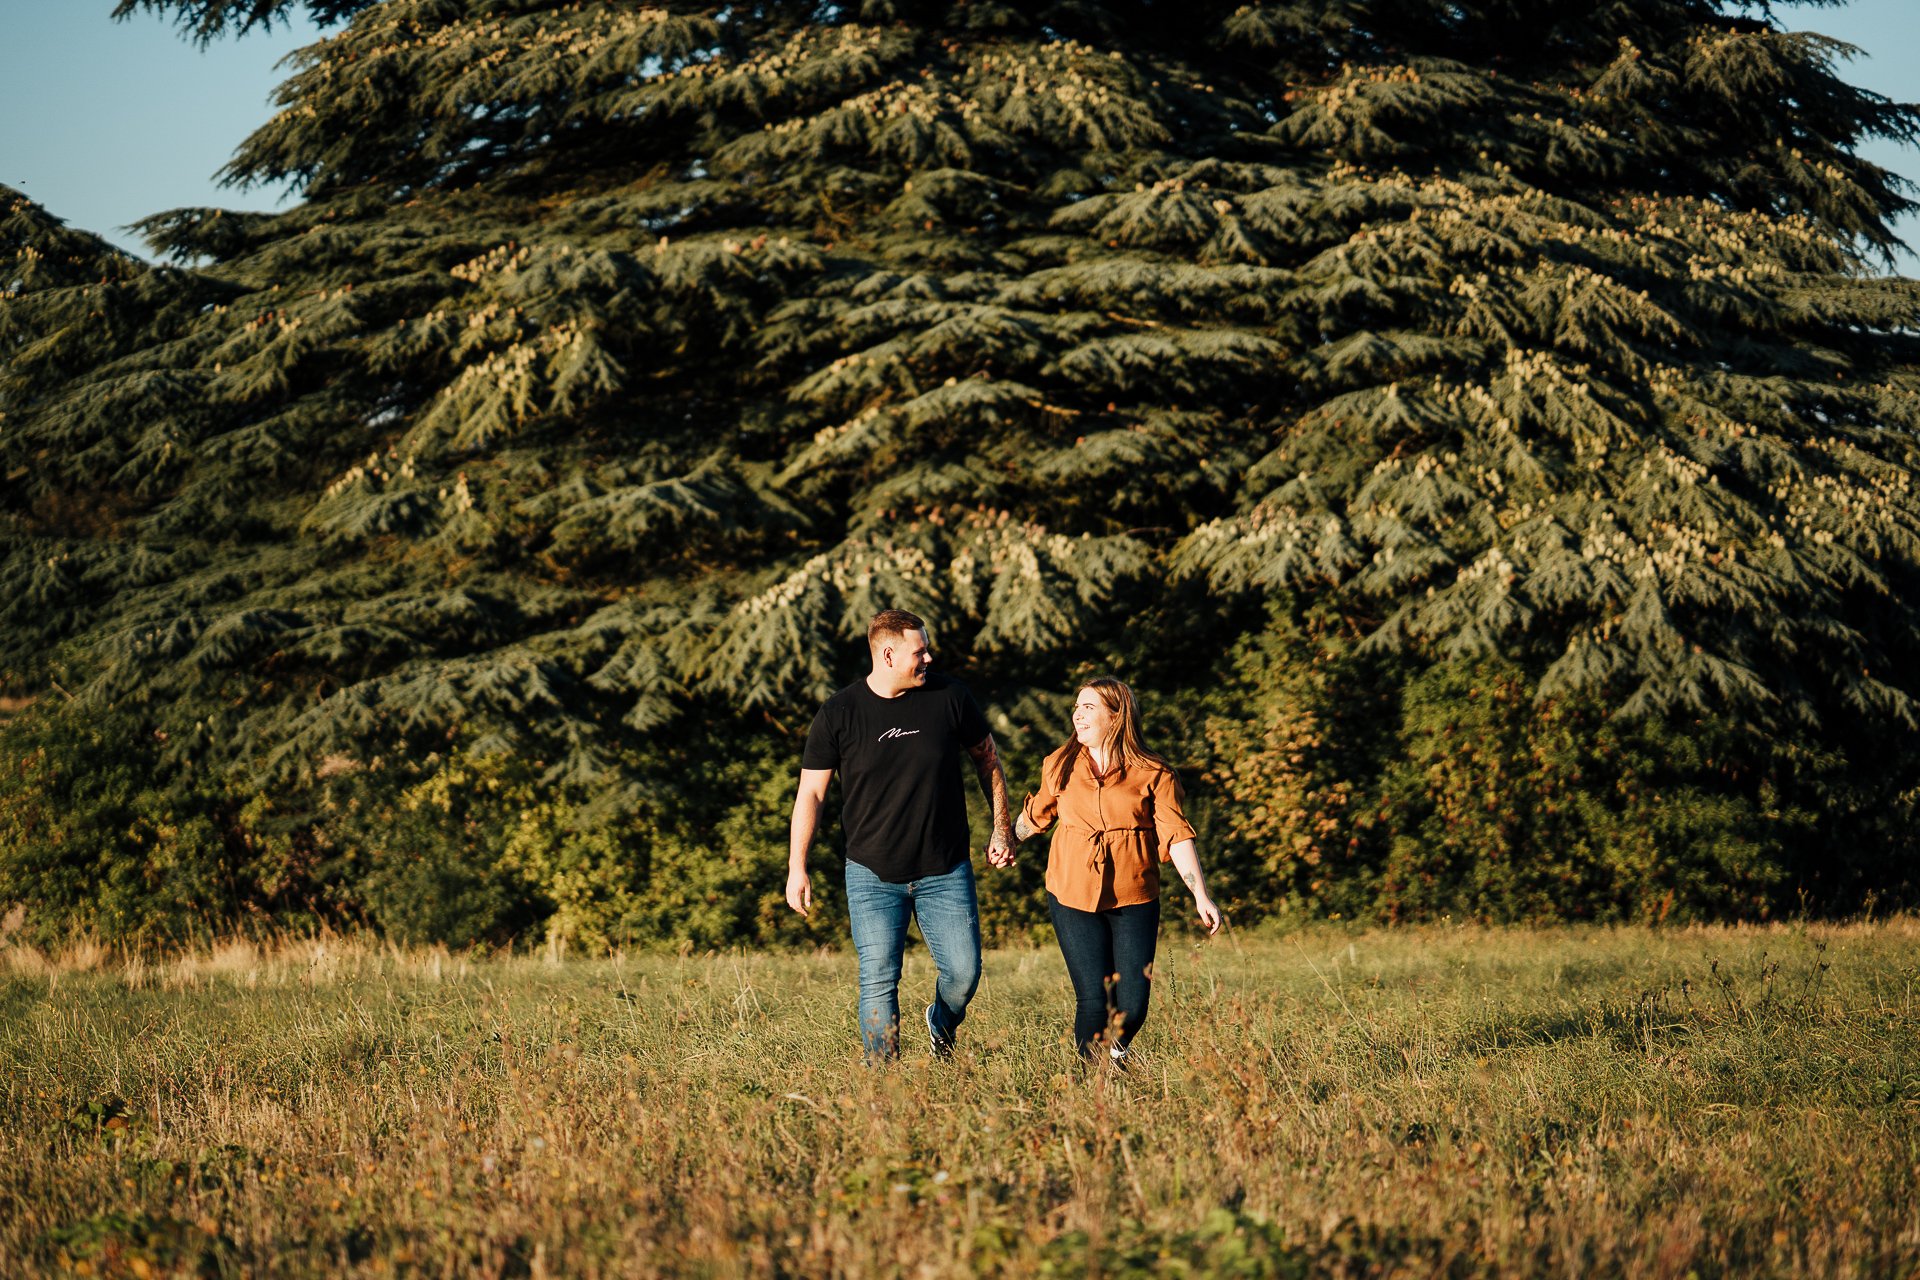 Engaged couple looking at each other during their autumnal sunset engagement shoot at Lullingstone Country Park, Kent